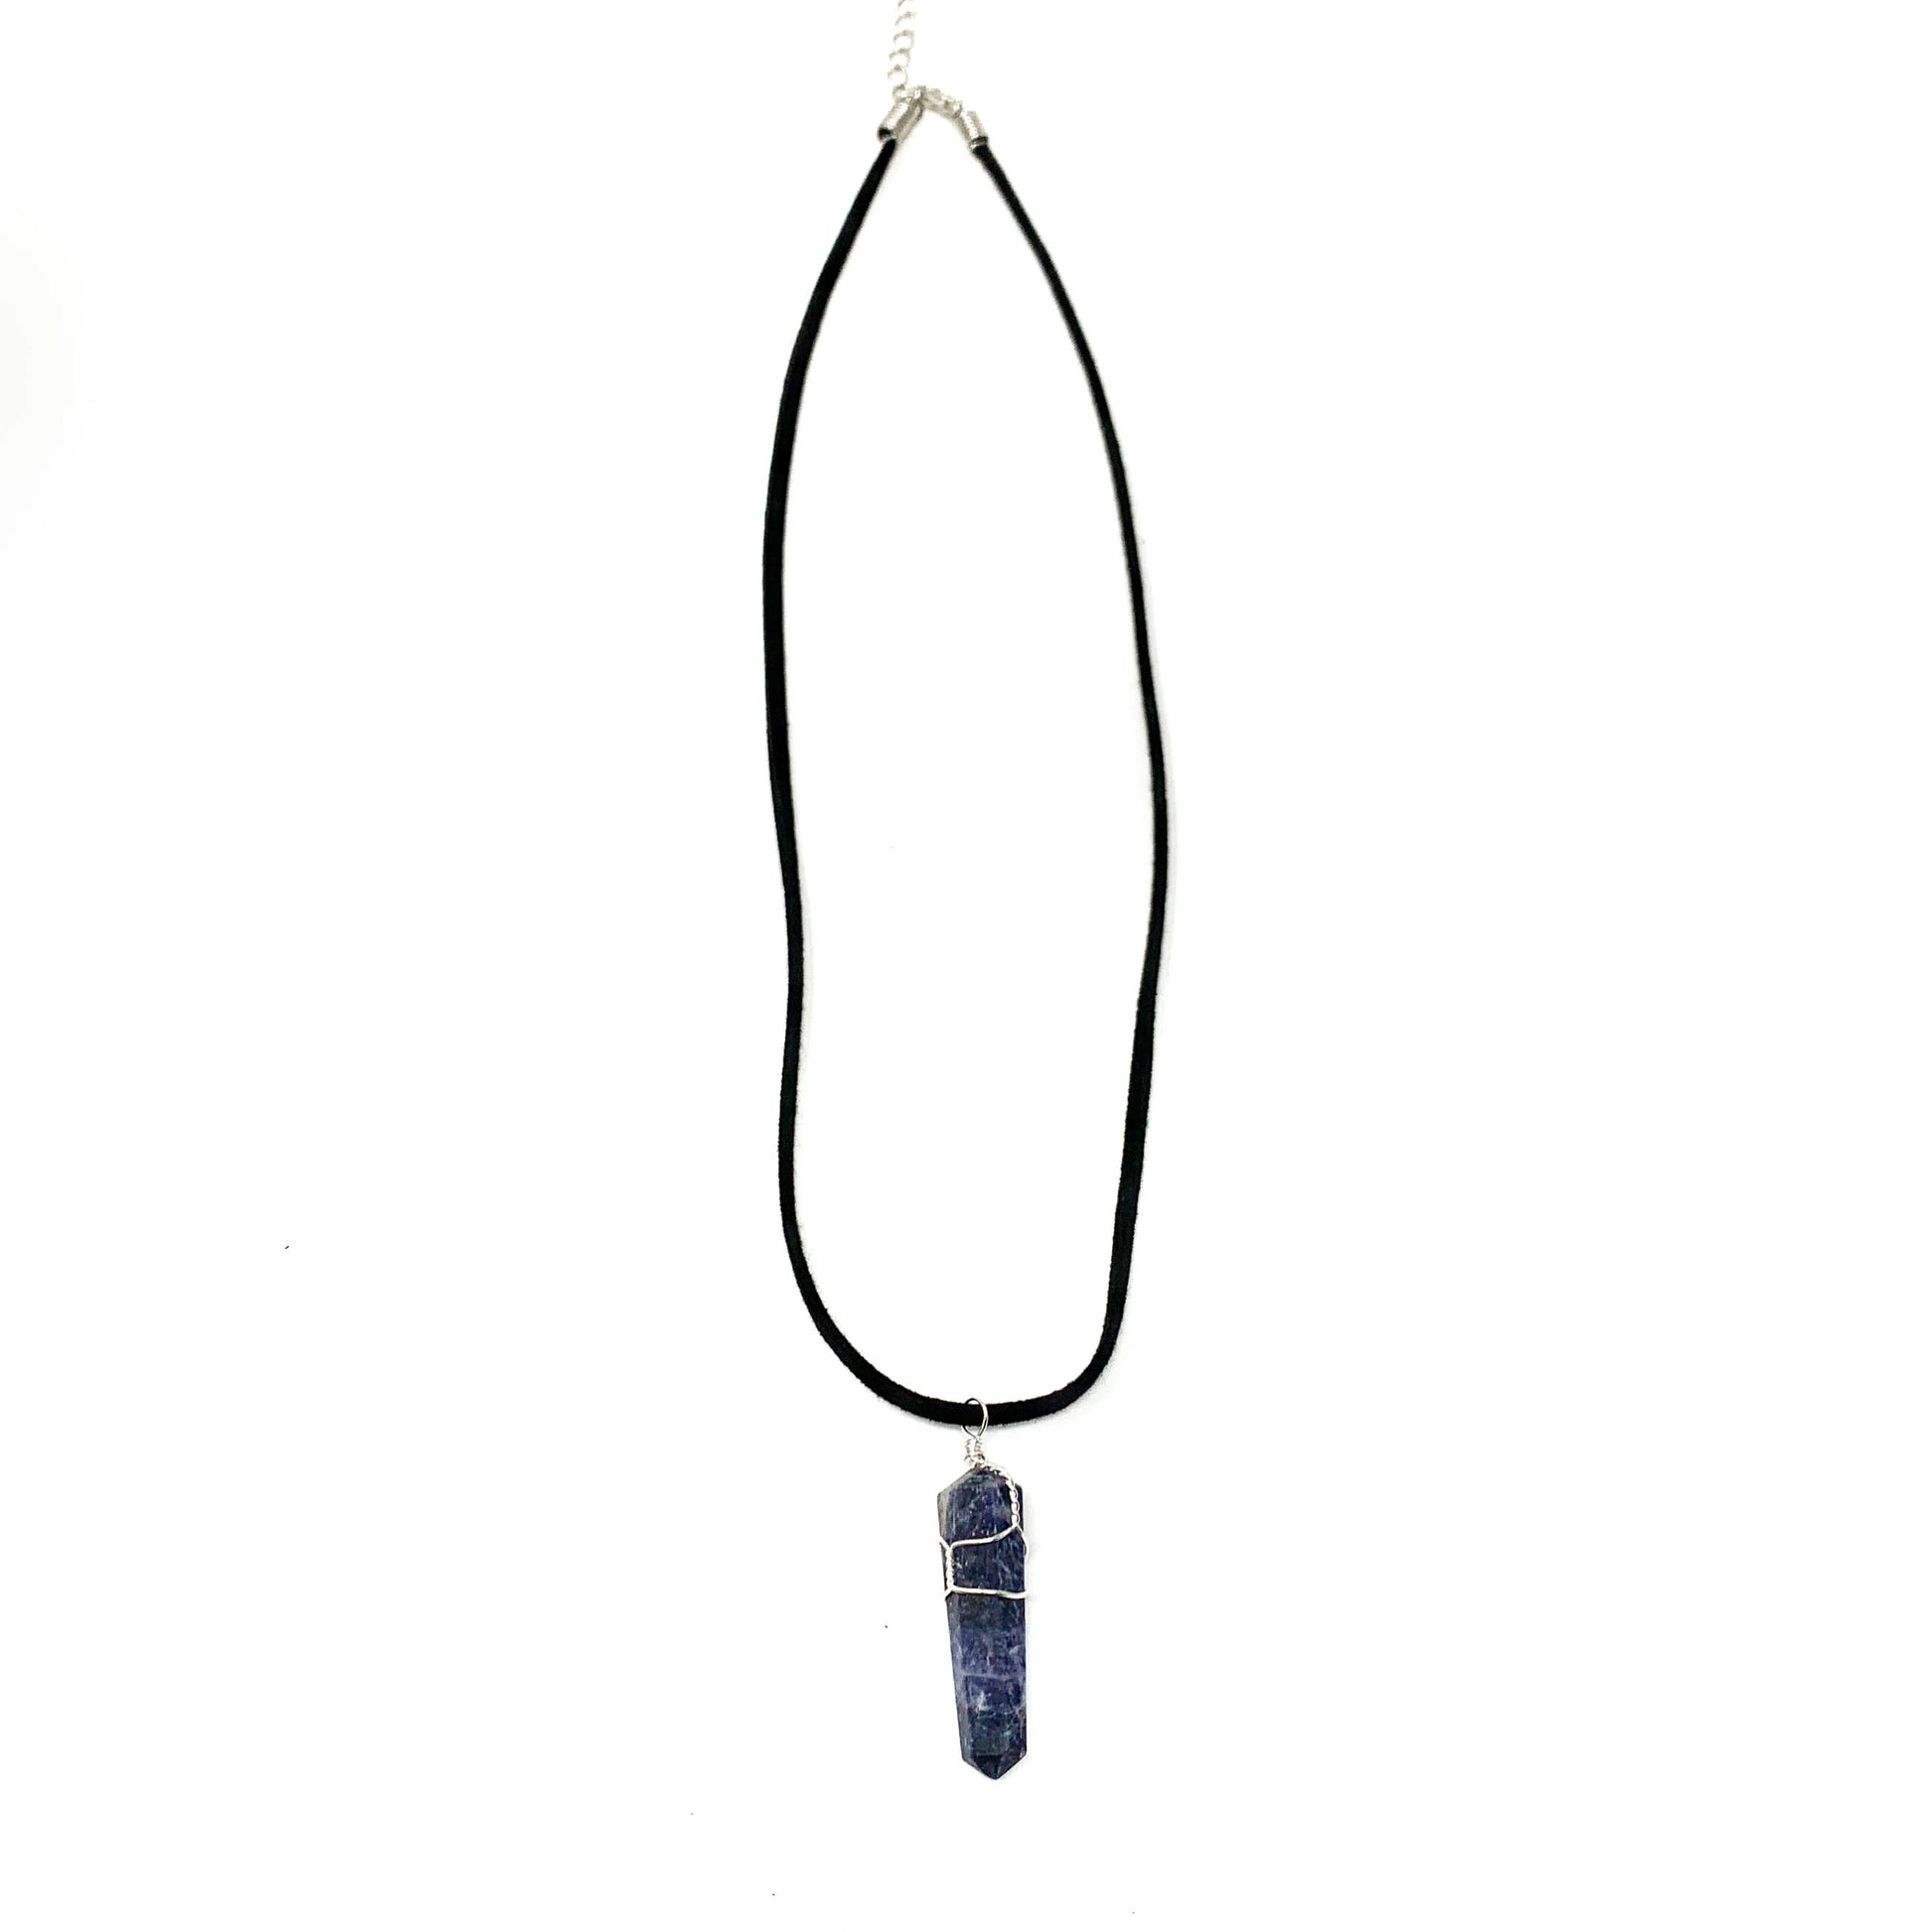 Sodalite healing crystal necklace